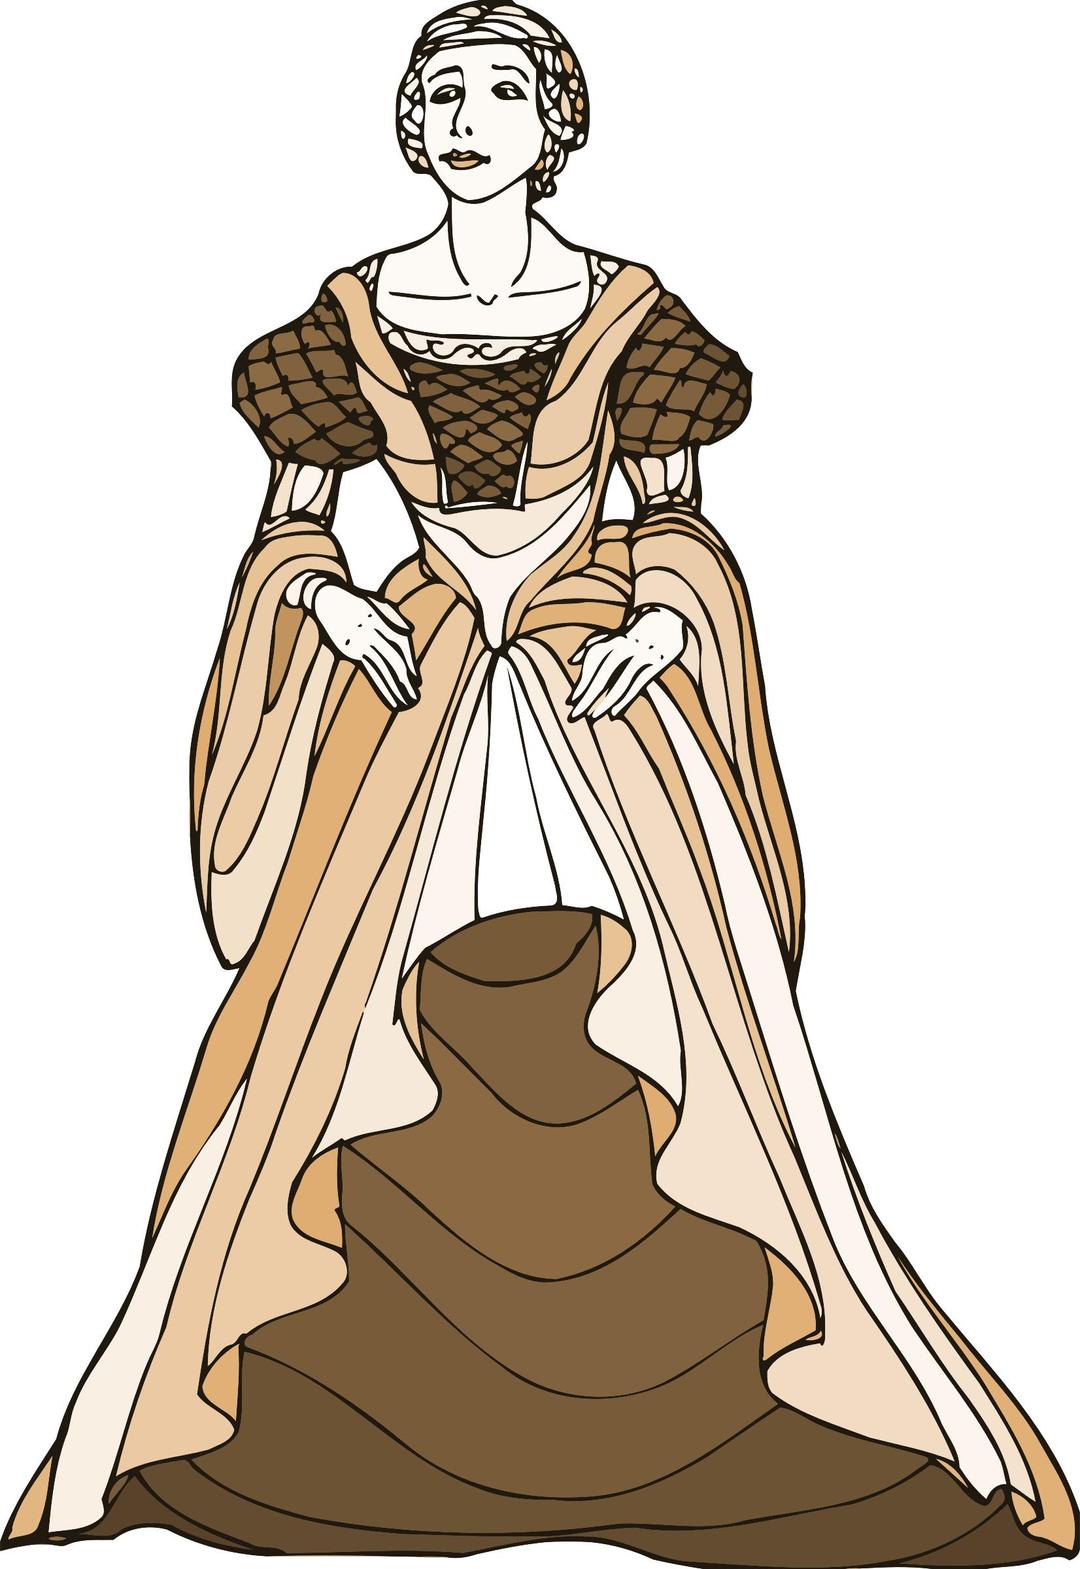 Shakespeare characters - Juliet png transparent